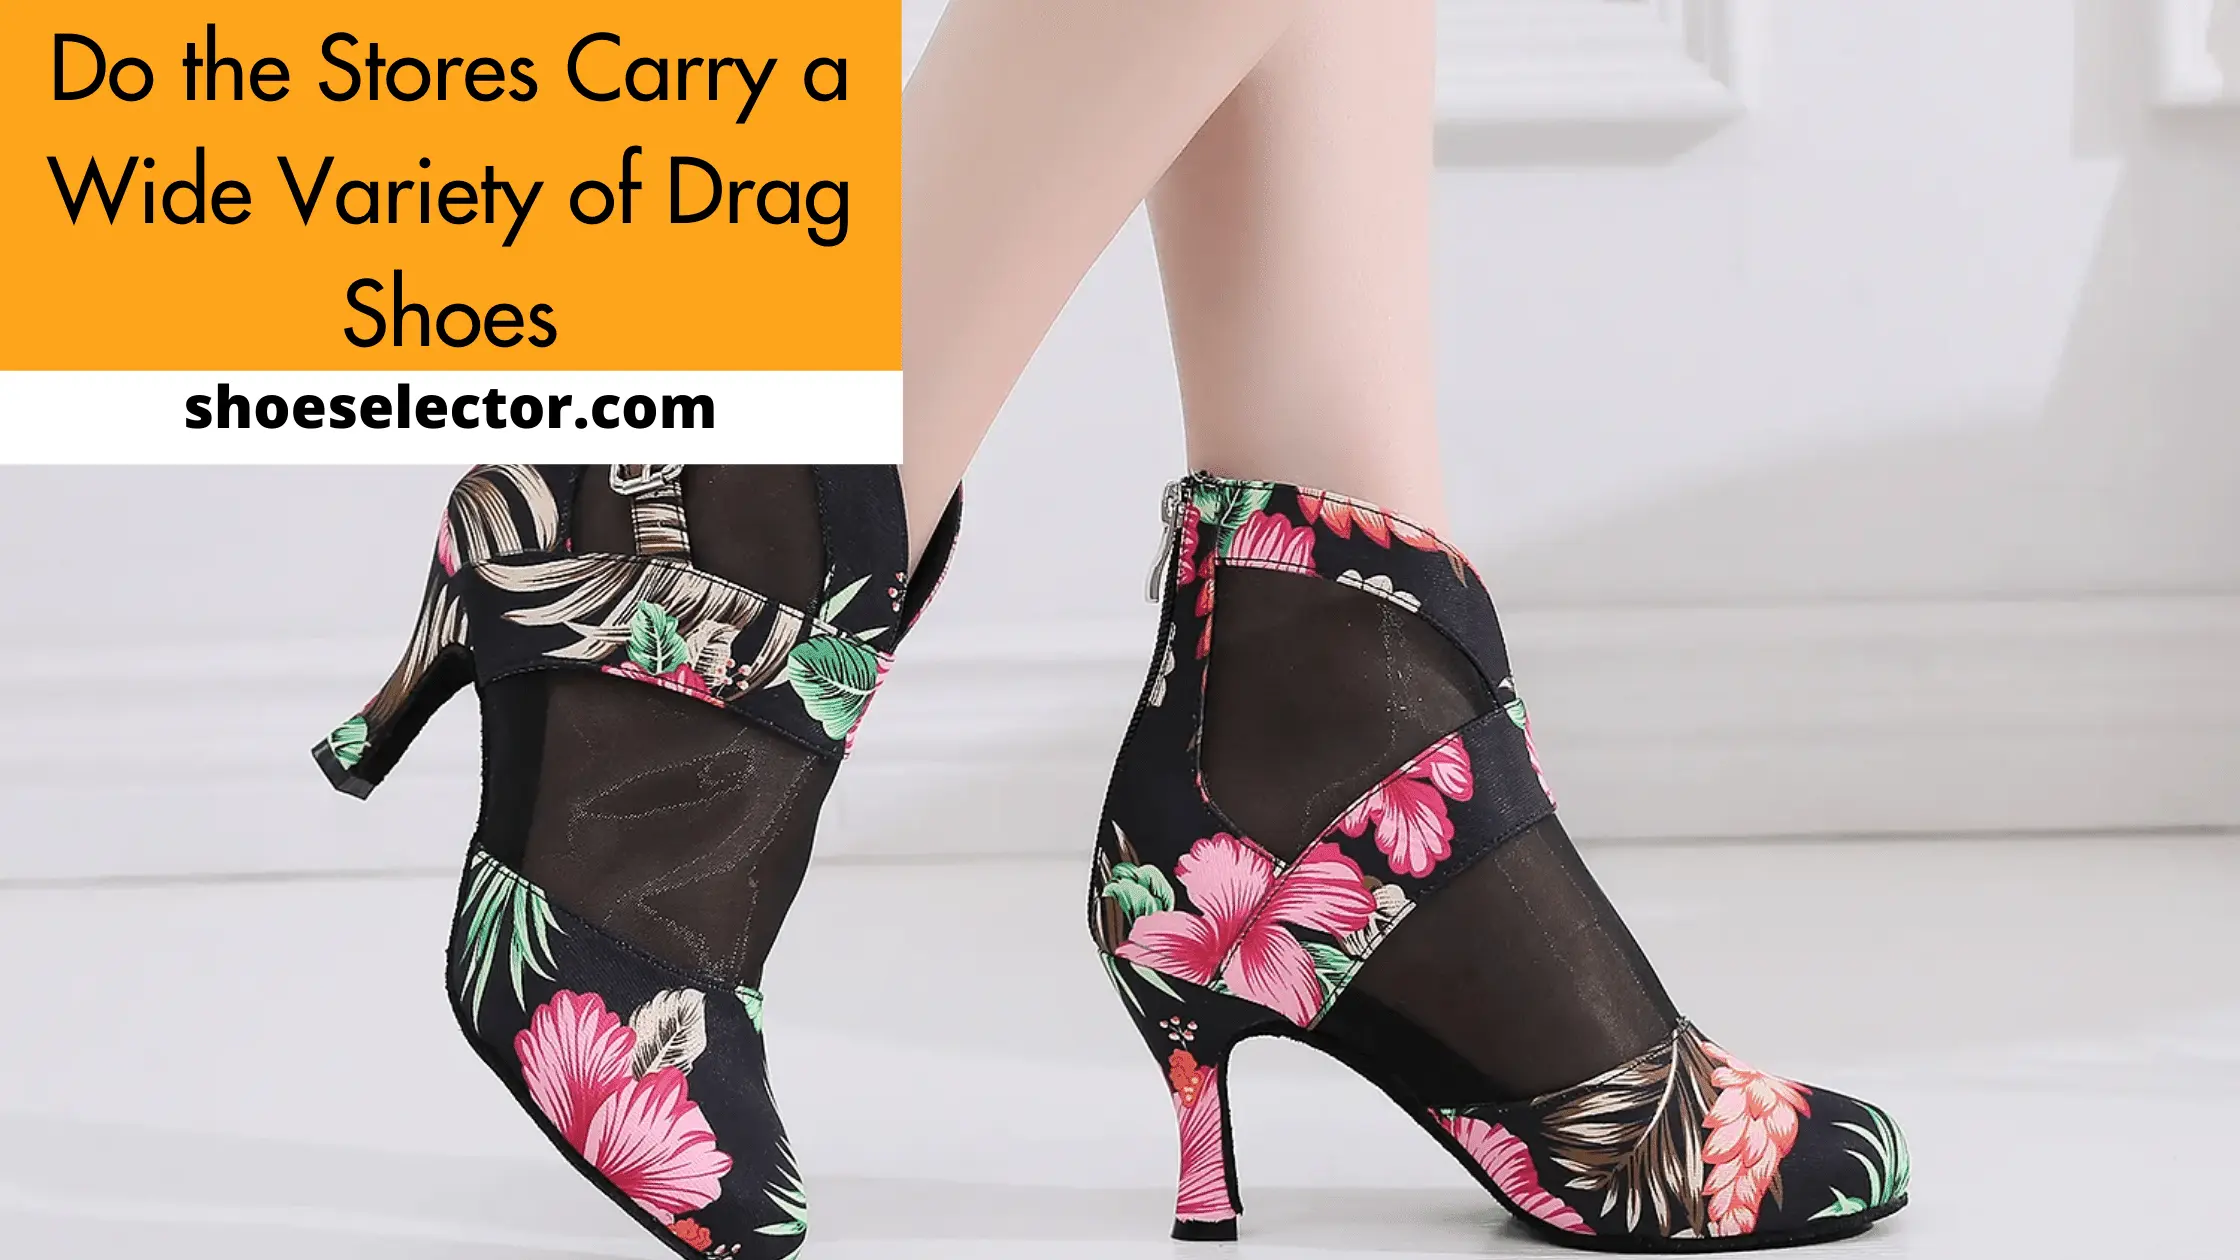 Do the Stores Carry a Wide Variety of Drag Shoes? 